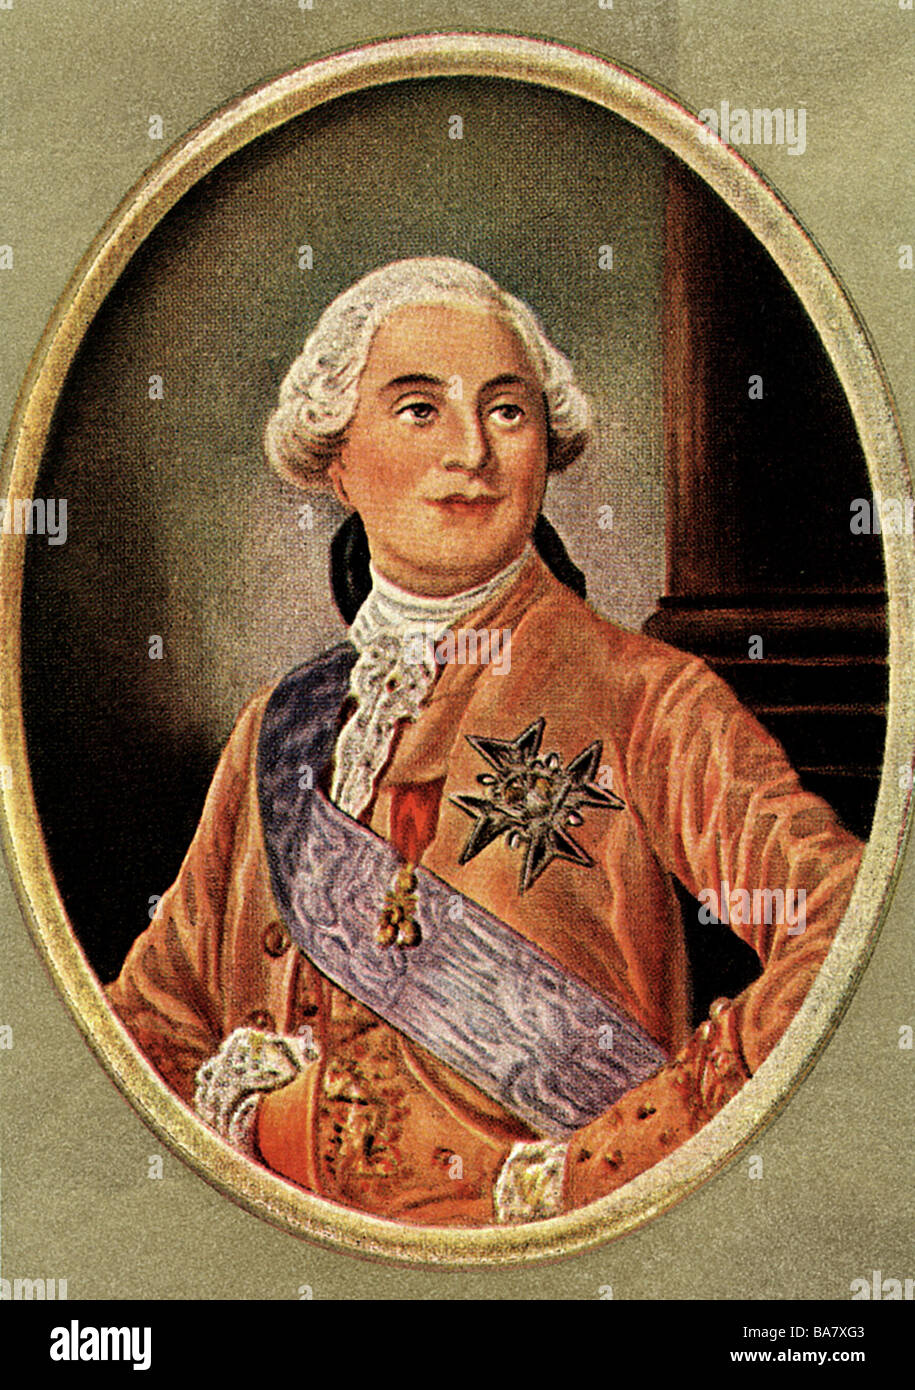 Louis XVI, 23.8.1754 - 21.1.1793, King of France 10.5.1774 - 21.9.1792, portrait, print after miniature, 18th century, cigarette card, Germany, 1933, , Stock Photo